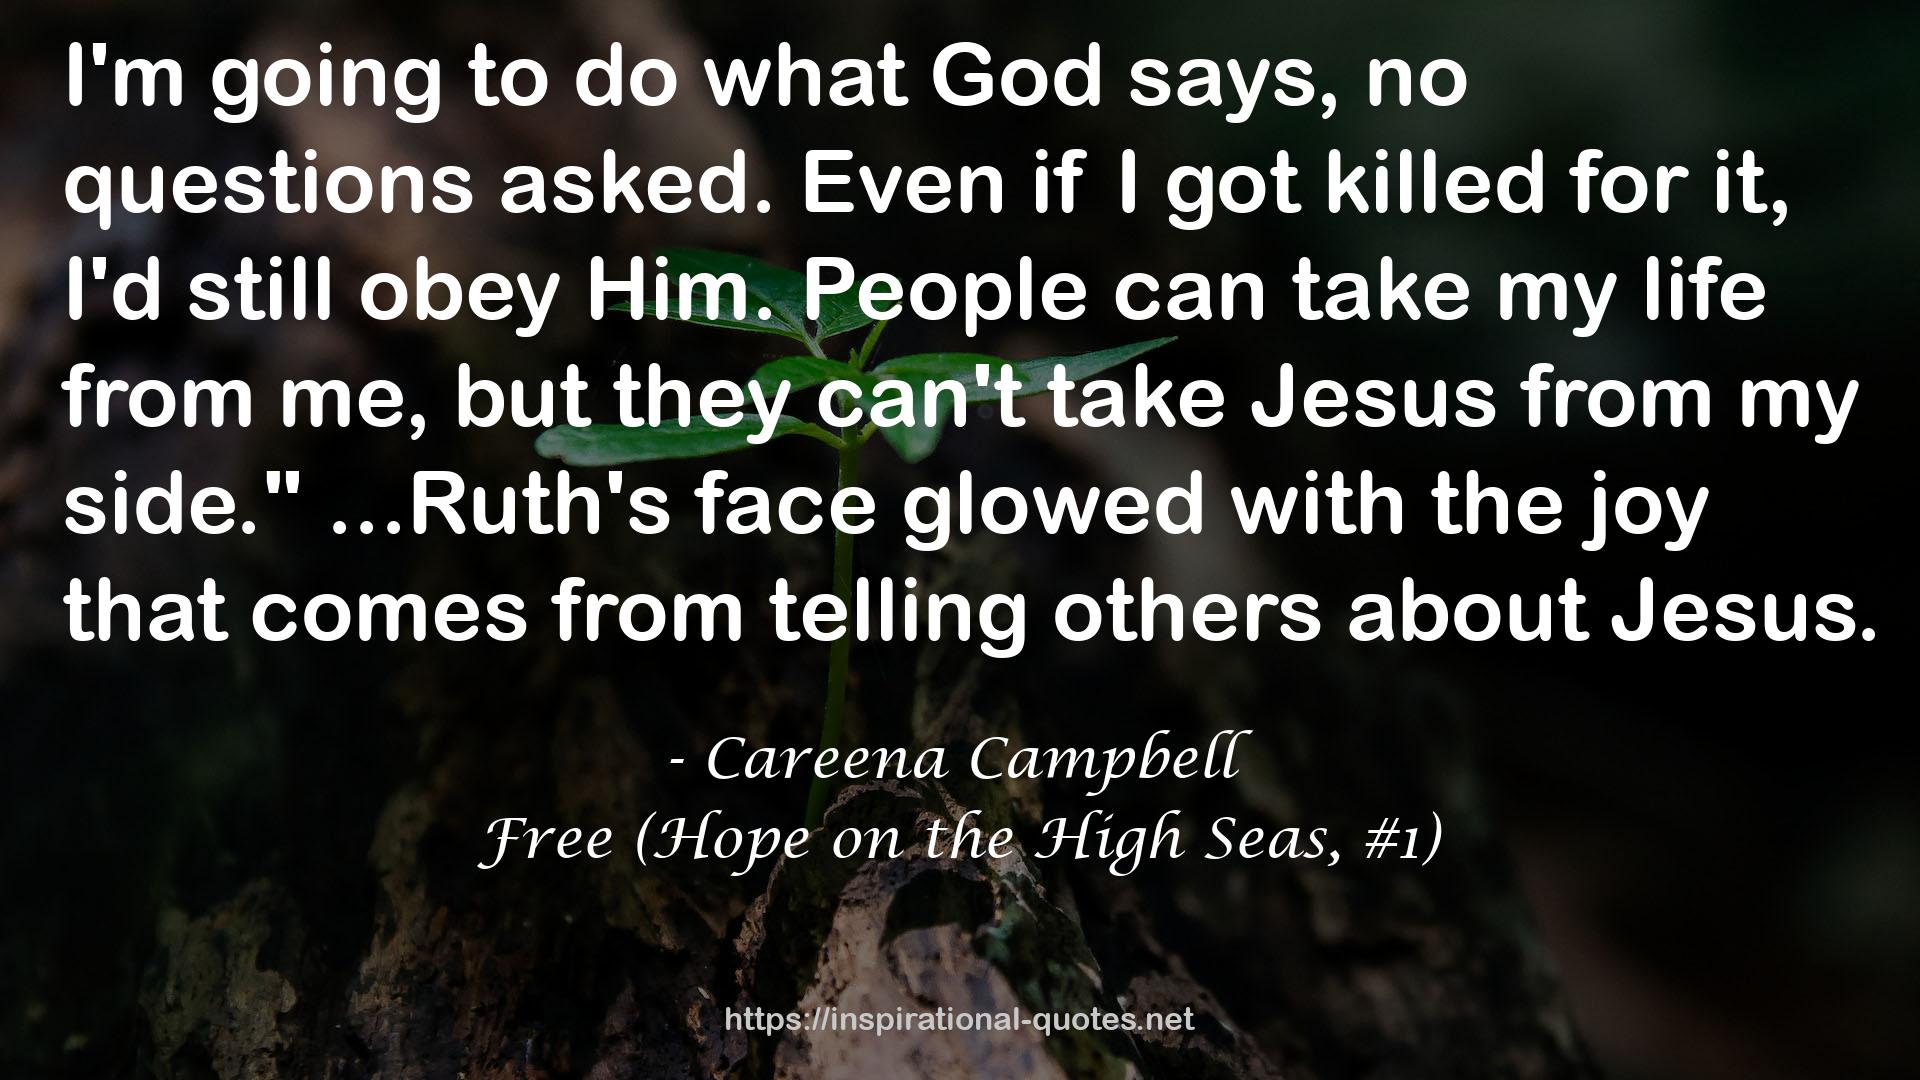 Free (Hope on the High Seas, #1) QUOTES